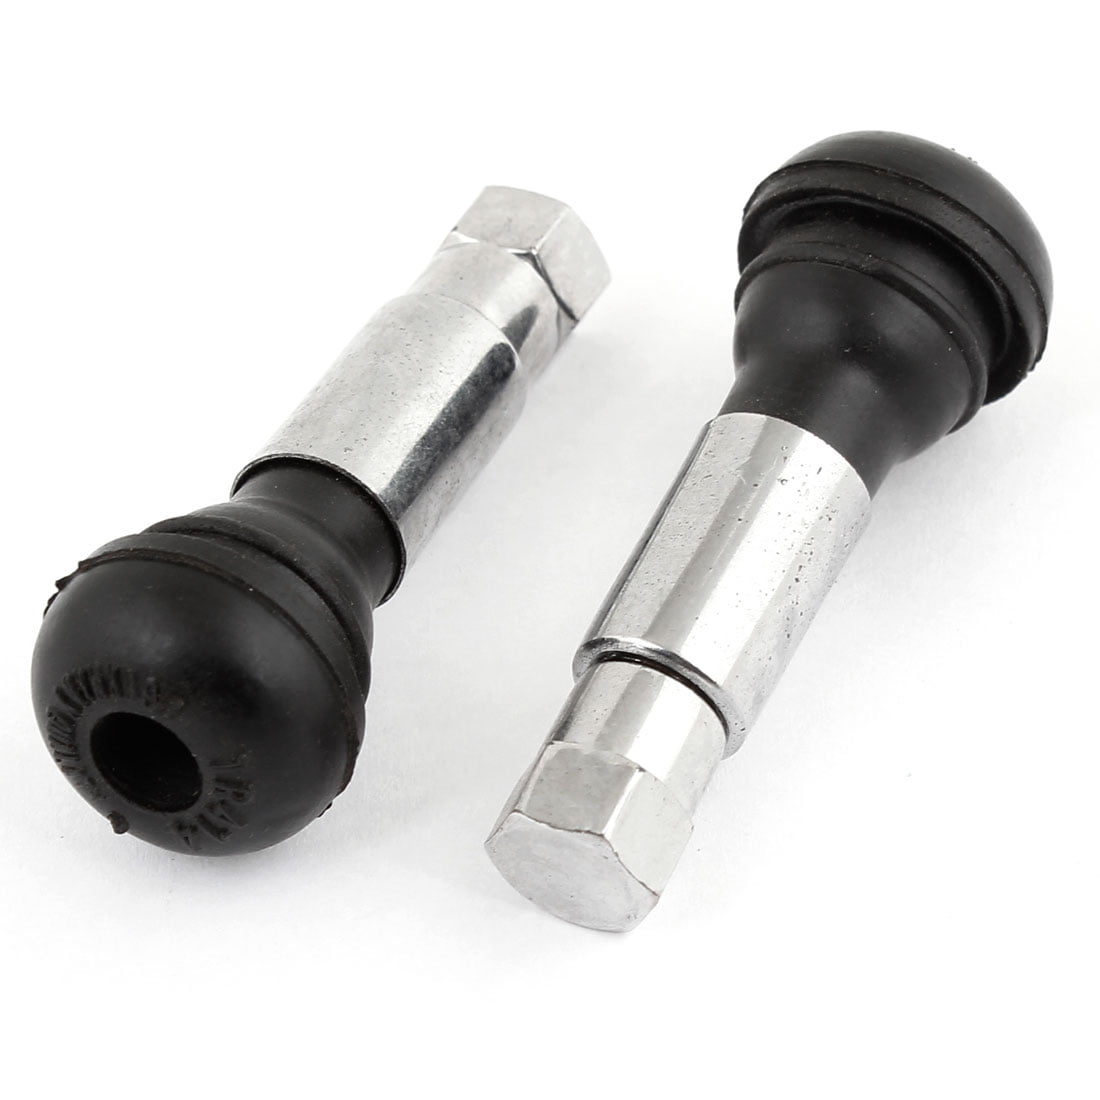 2 Pcs Silver Tone Black In Motorcycle Wheel Tire Tubeless Valves 